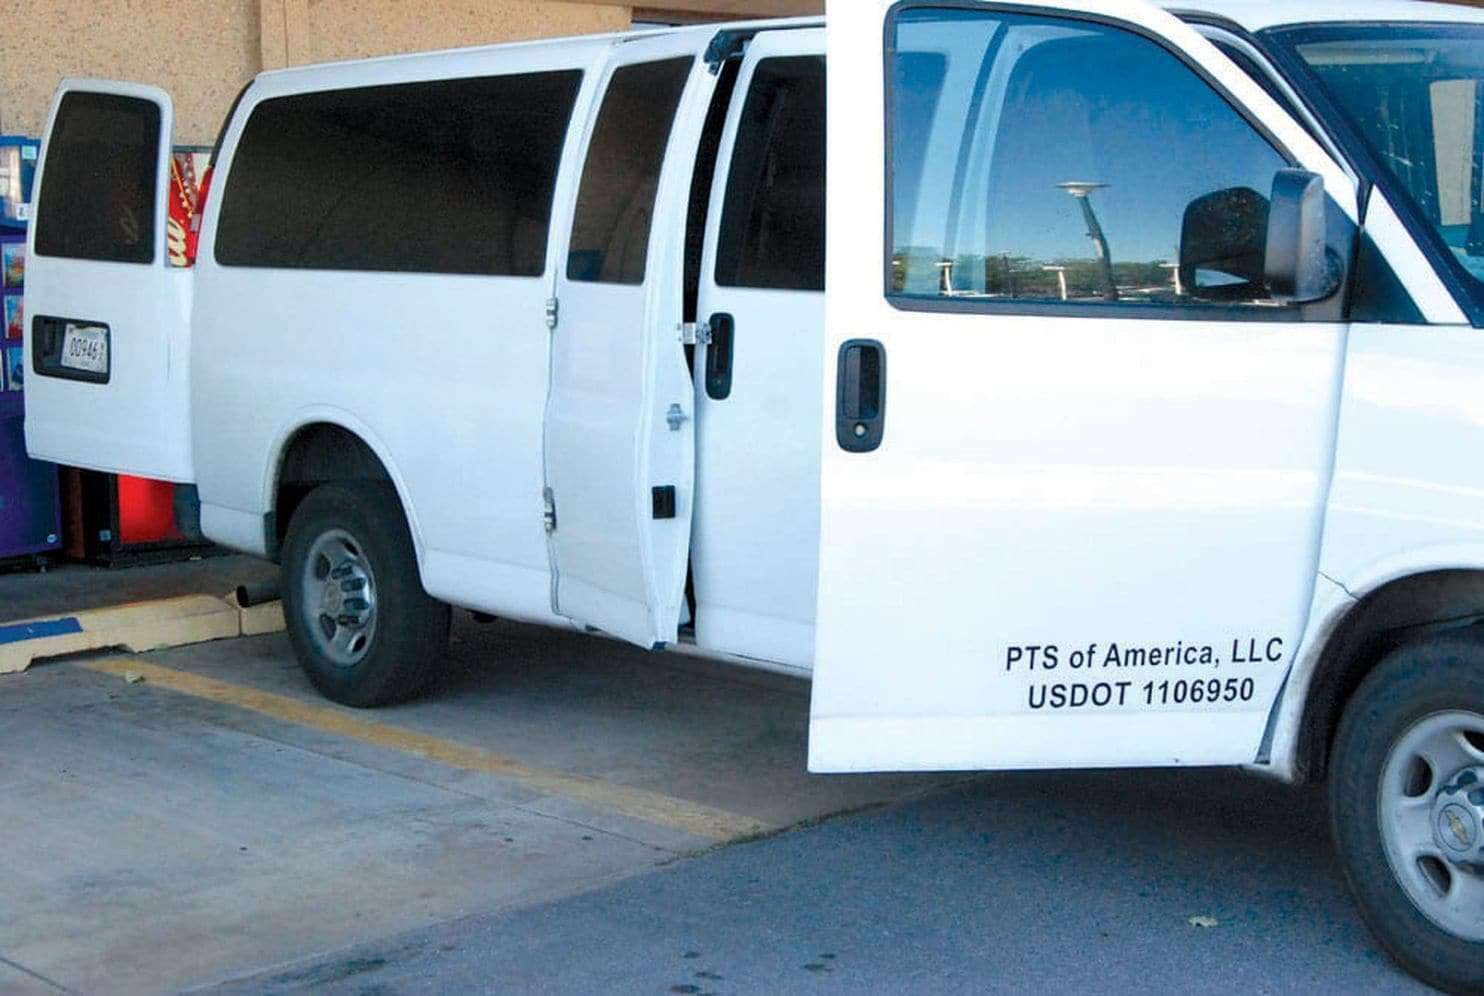 image for Privately run prisoner transport company kept detainee shackled for 18 days in human waste, lawsuit alleges